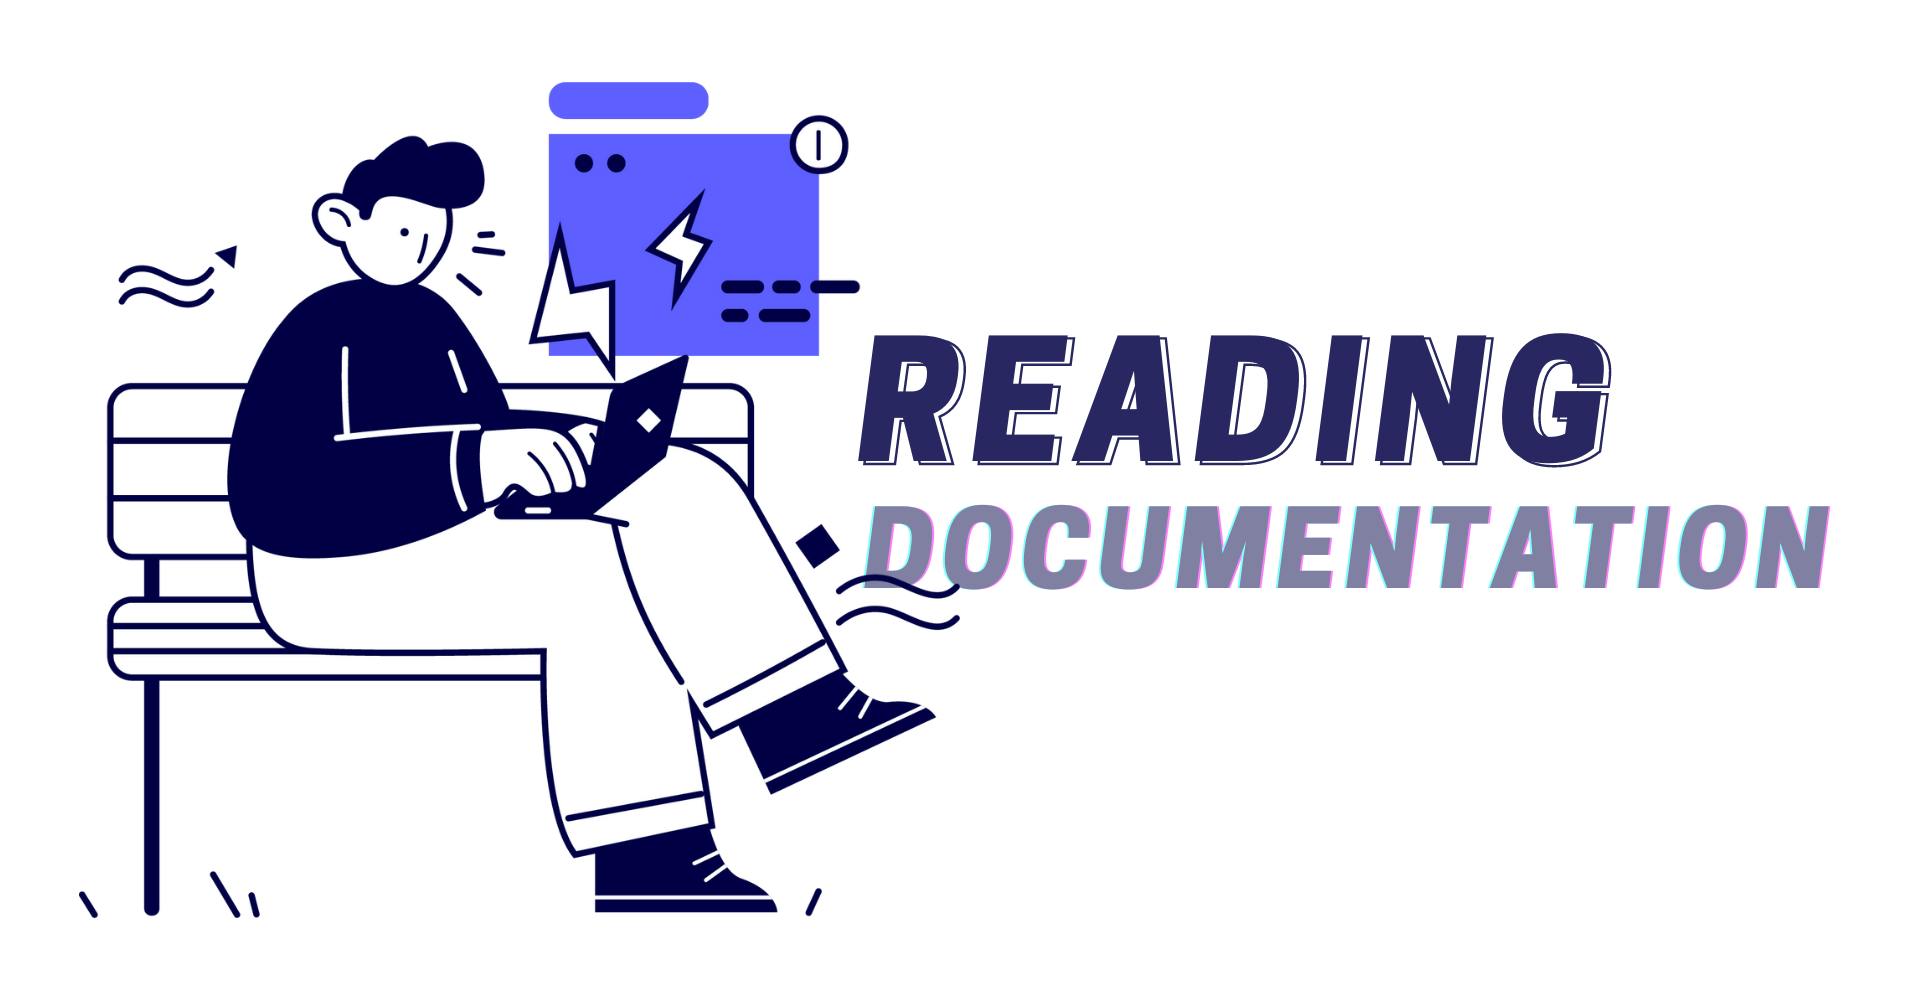 My first mobile application reading documentation